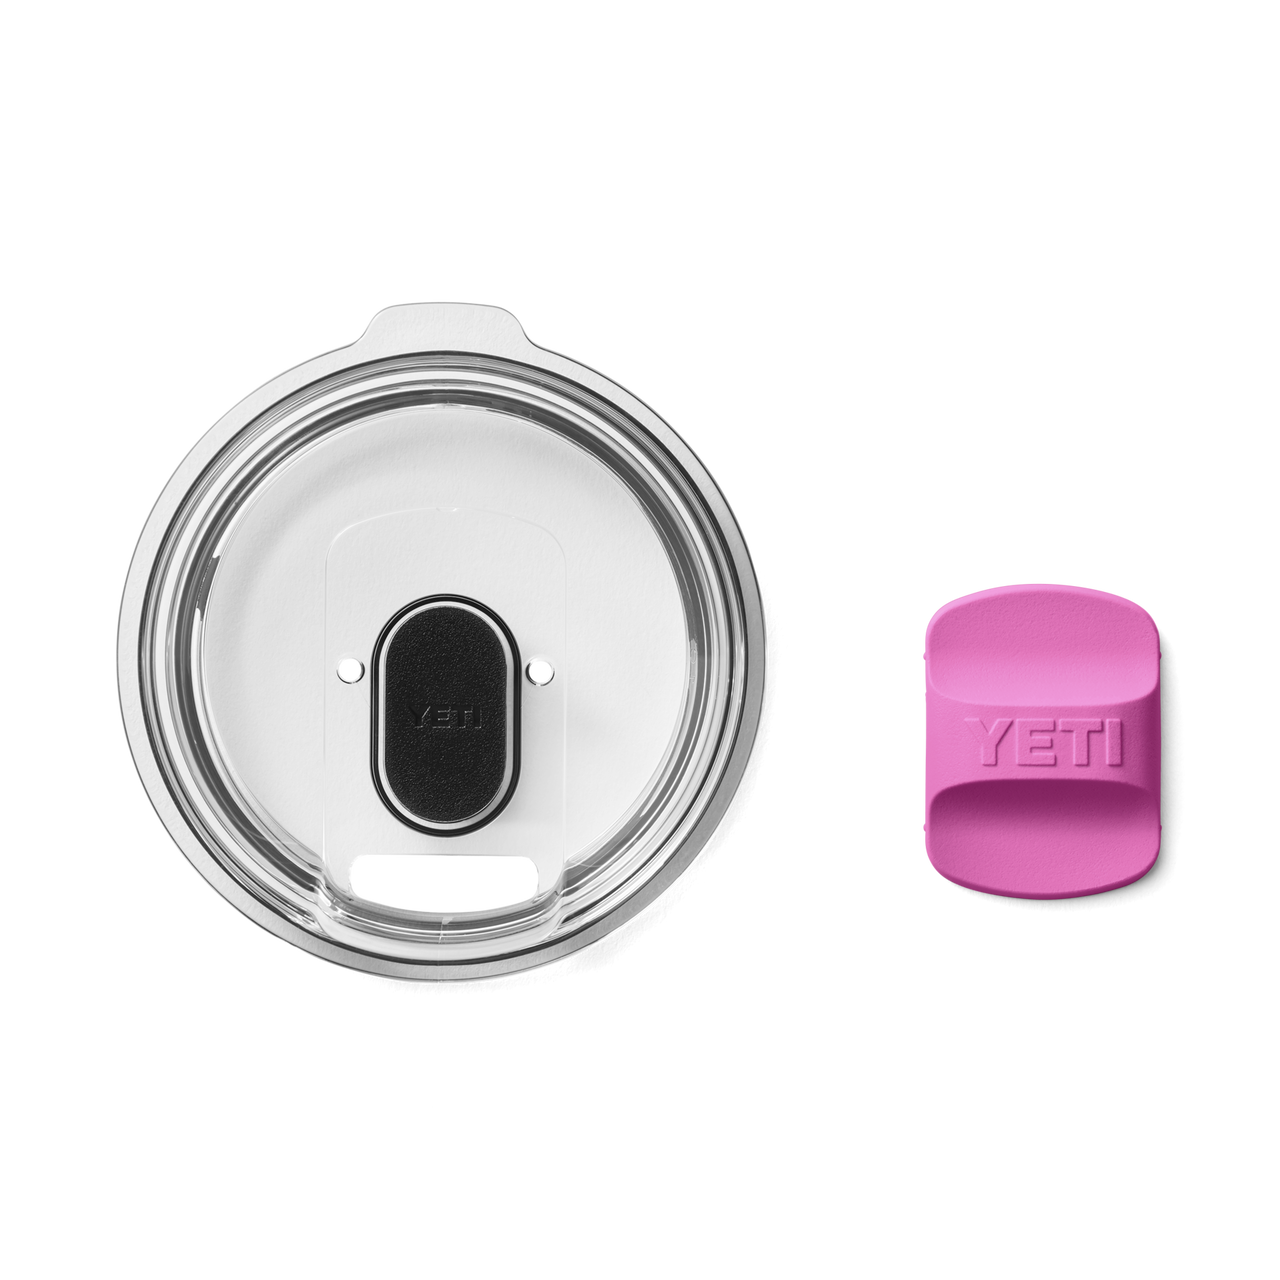 For anyone wondering about the Magslider pink pack : r/YetiCoolers